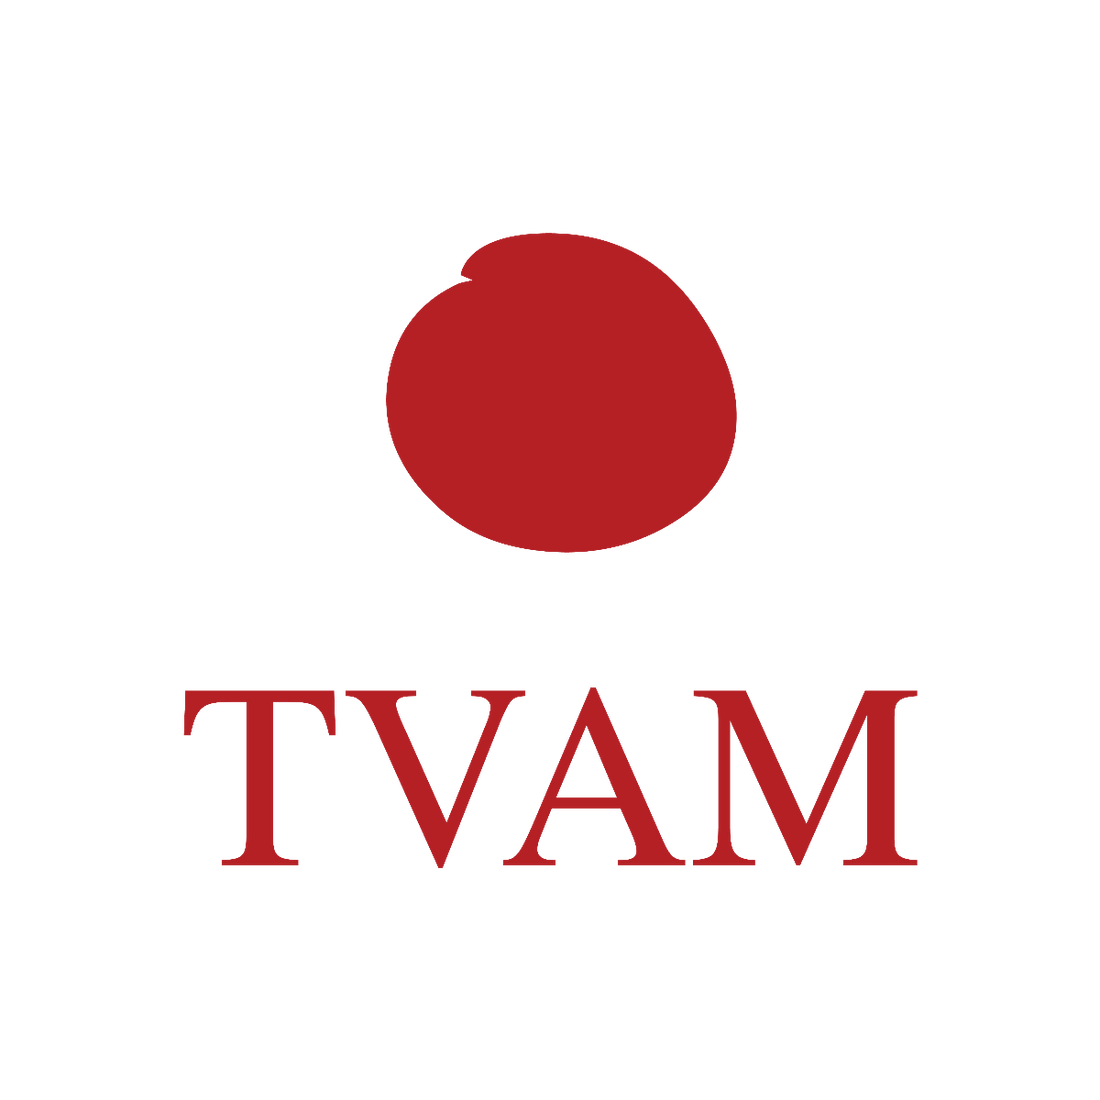 Know your brand - TVAM